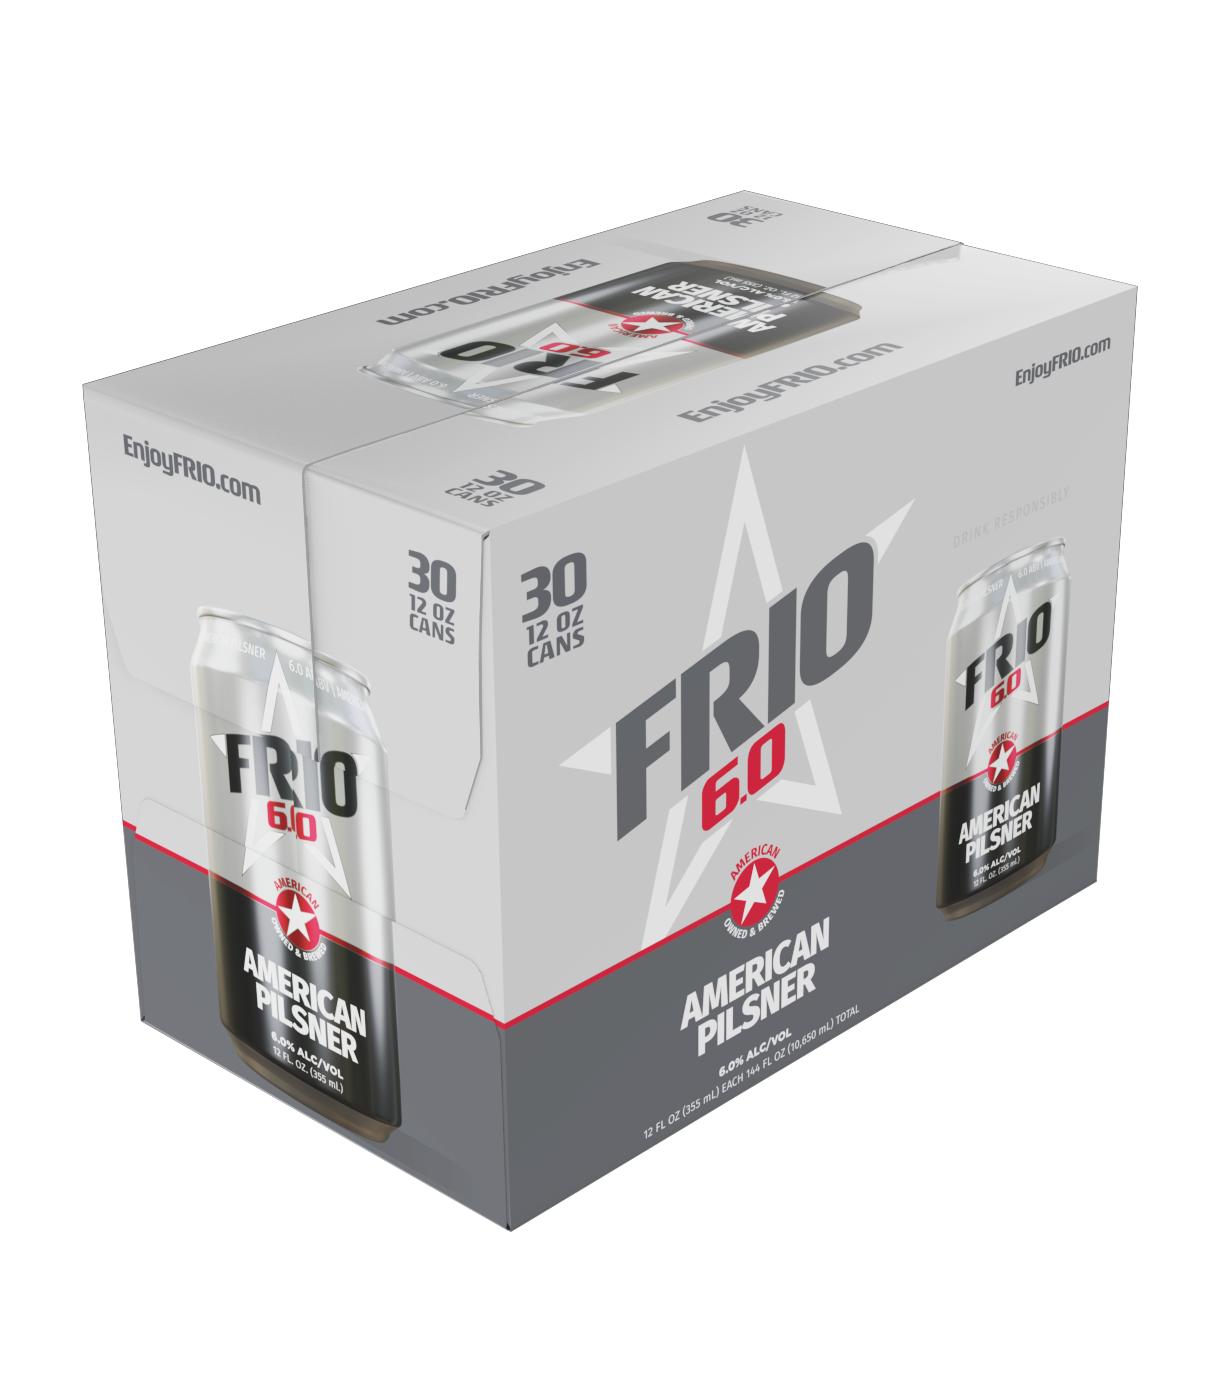 Frio 6.0 Beer 12 oz Cans; image 1 of 2